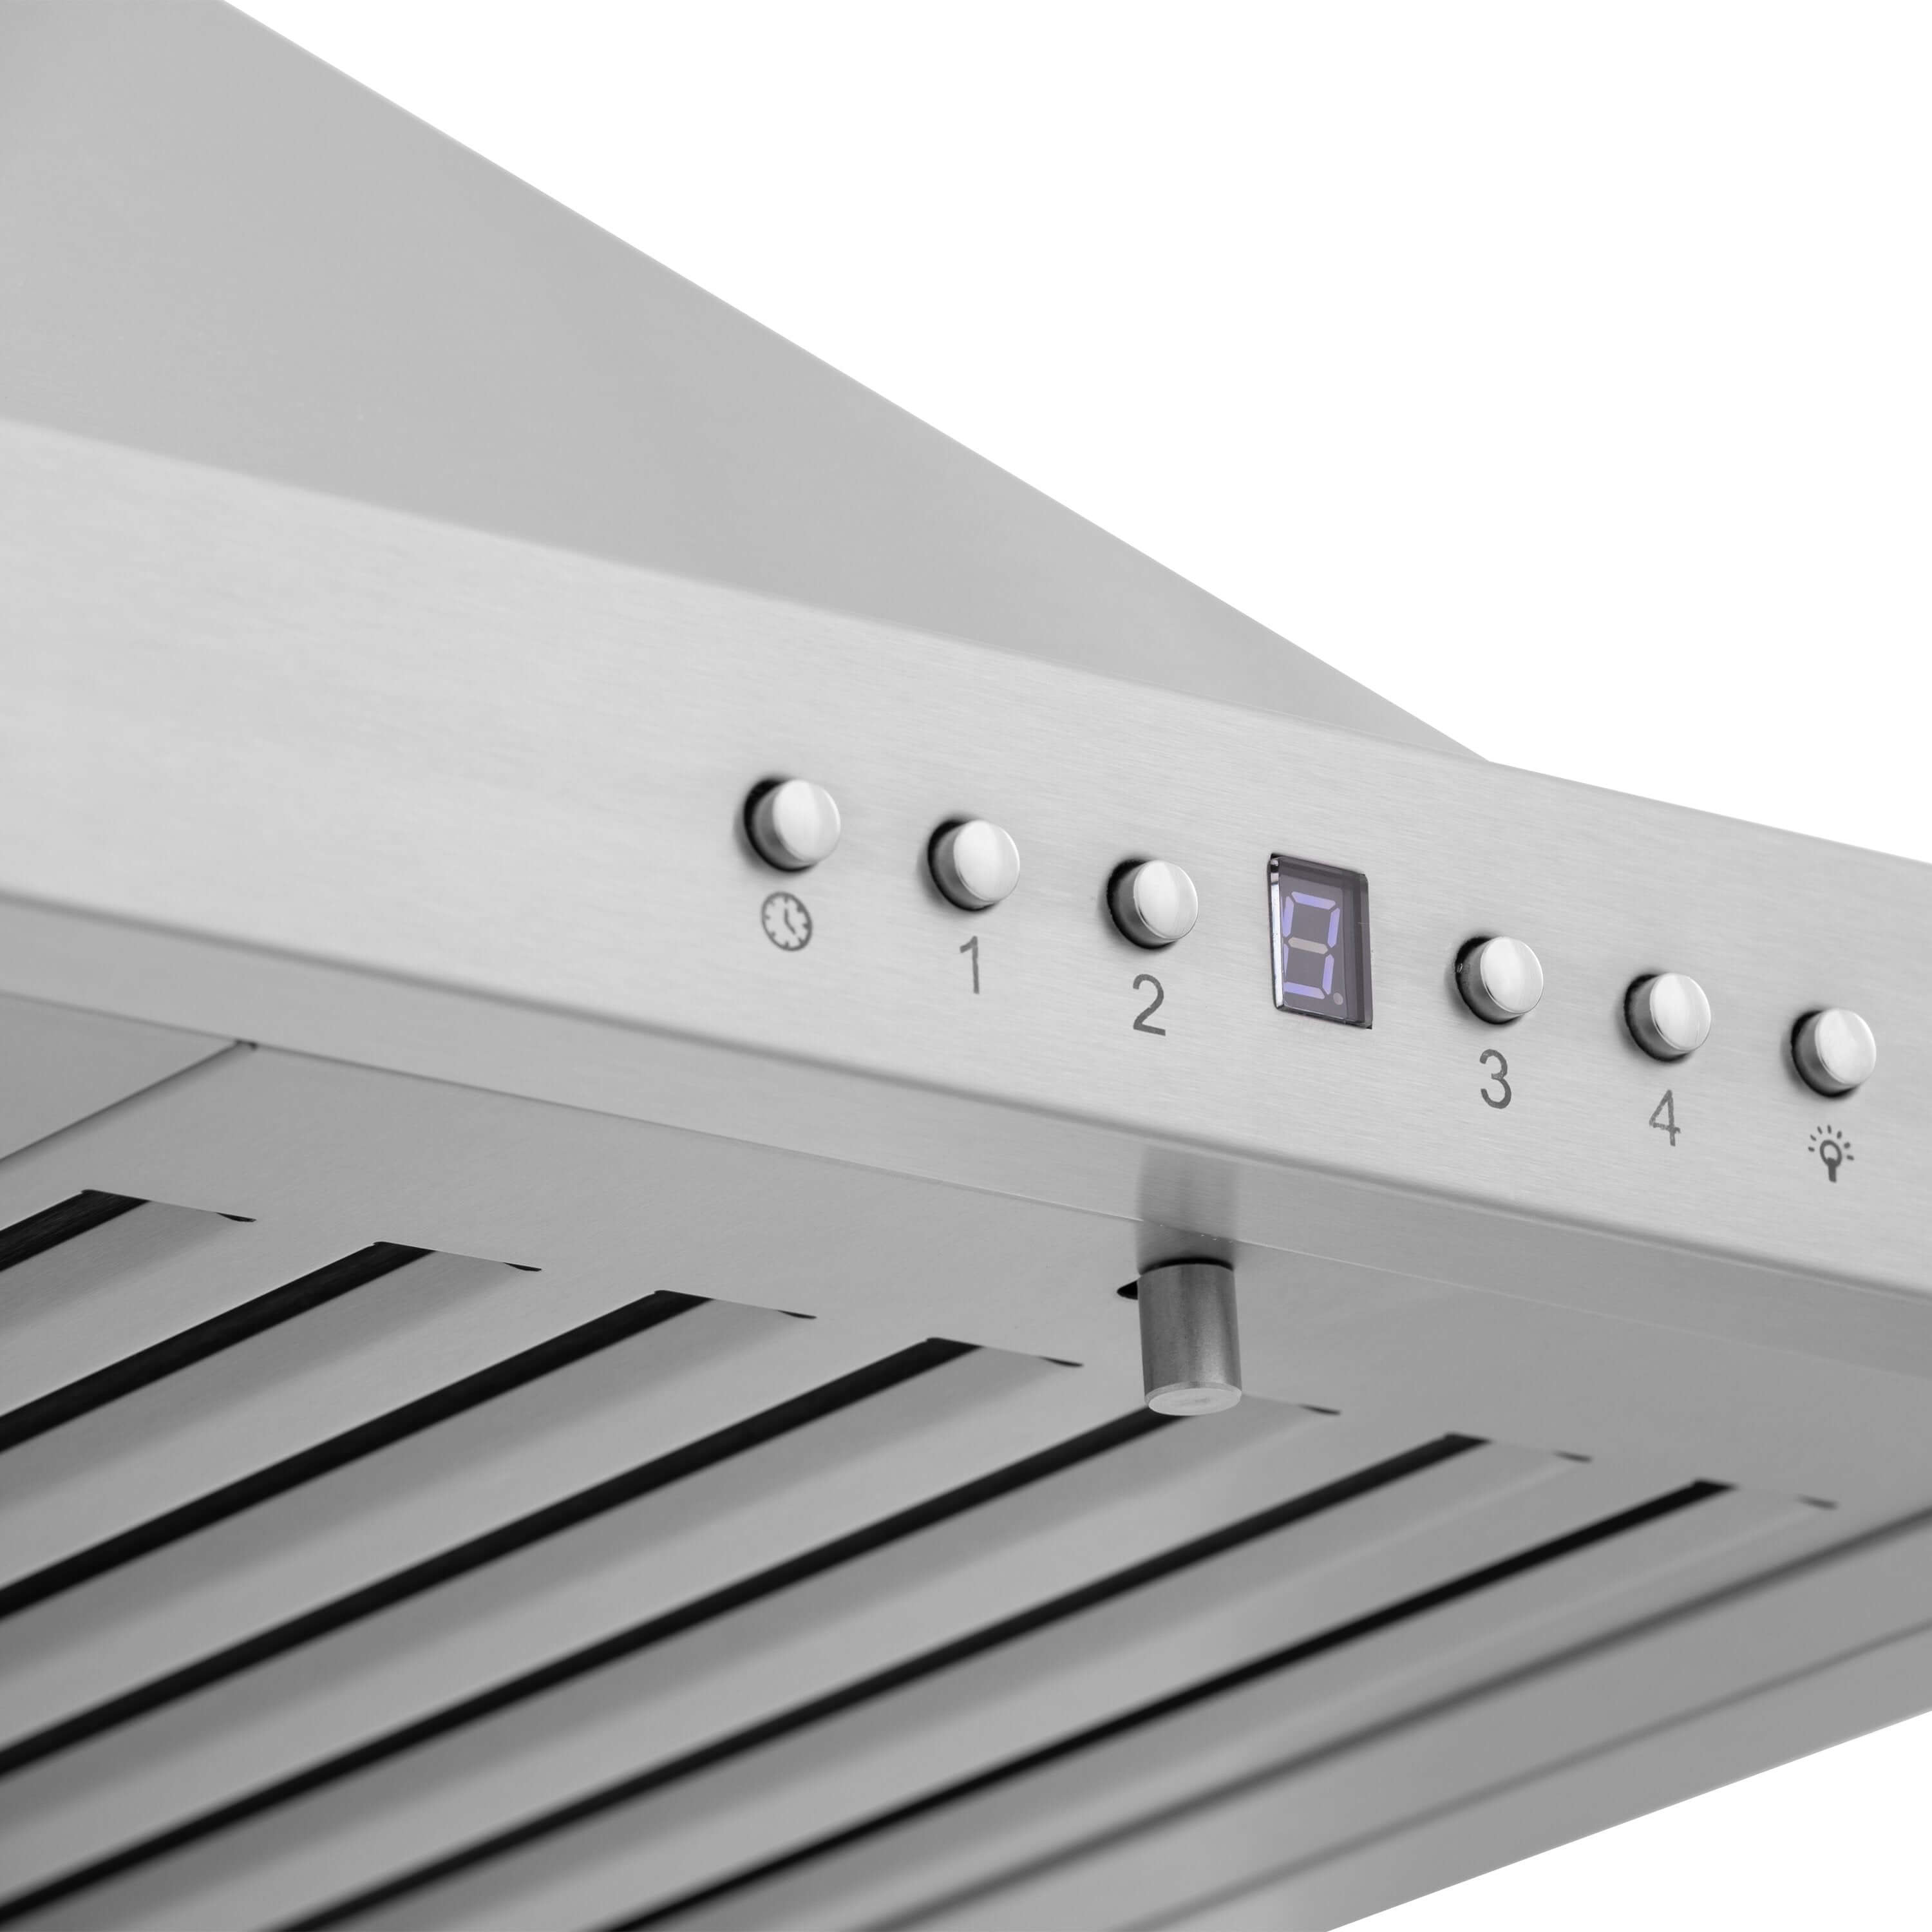 ZLINE 30 in. Recirculating Wall Mount Range Hood with Charcoal Filters in Stainless Steel (KB-CF-30) fan and lighting control buttons.